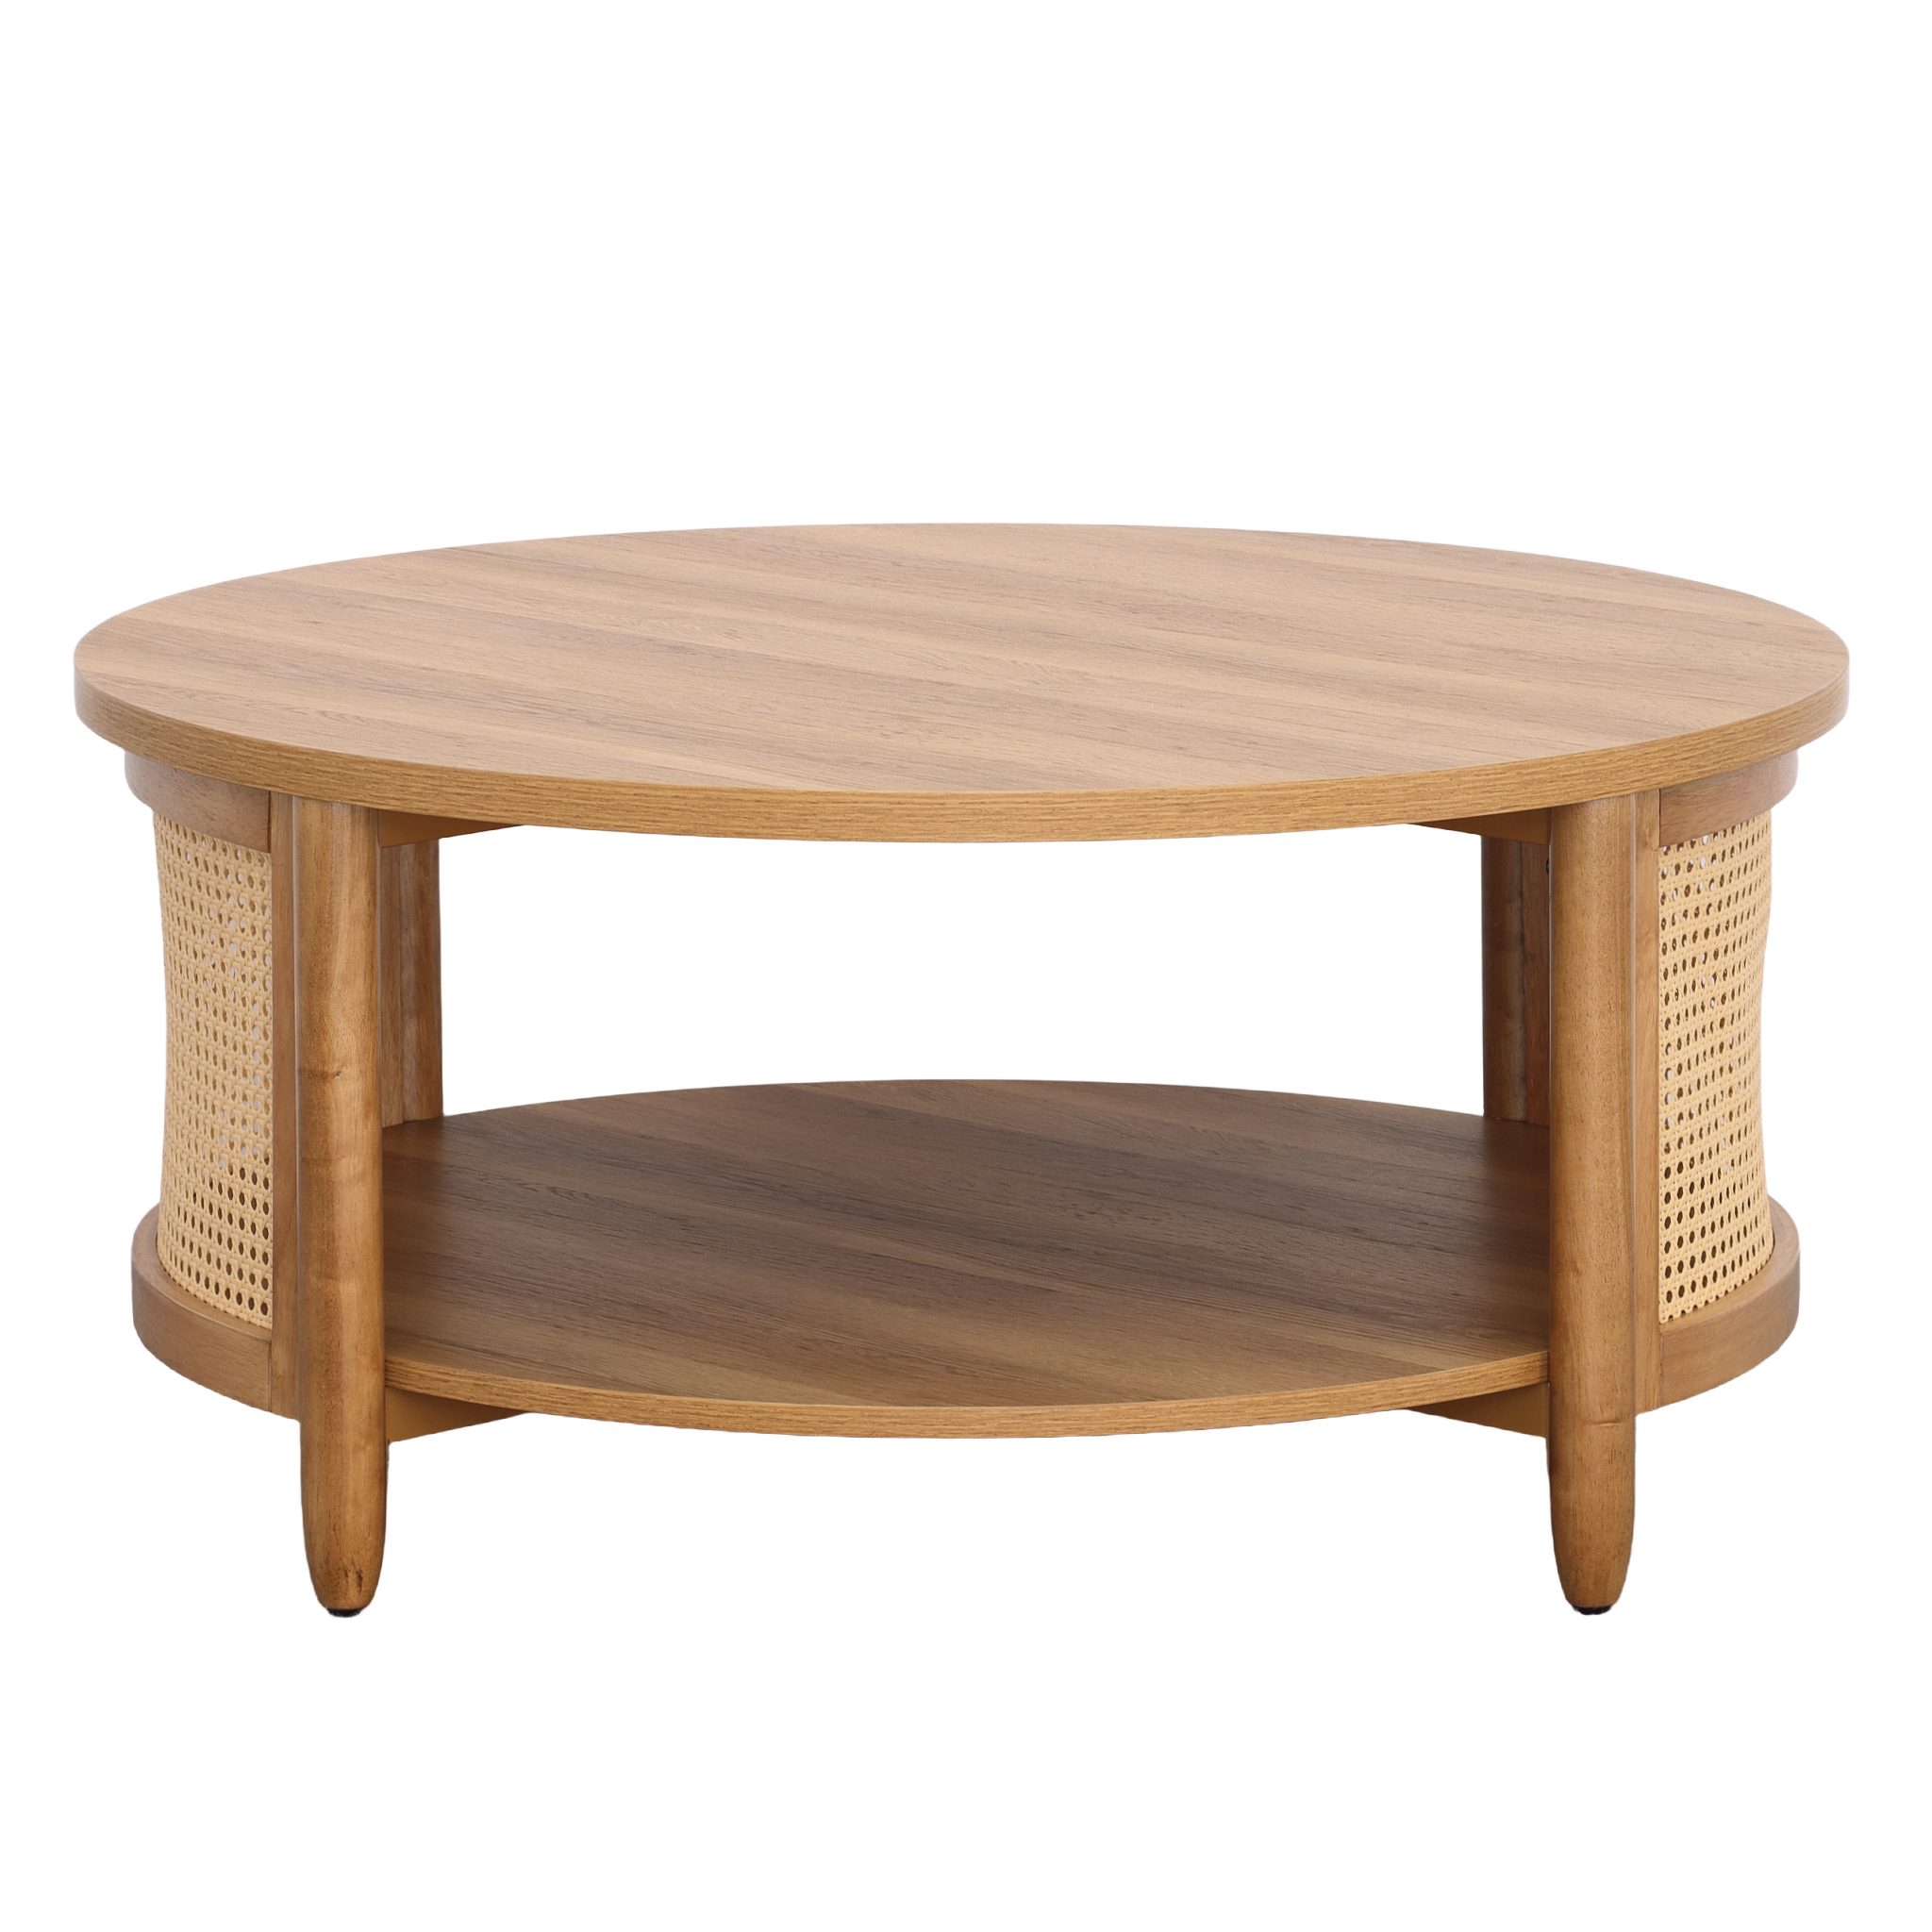 Better Homes & Gardens Springwood Caning Coffee Table, Light Honey Finish - image 3 of 9